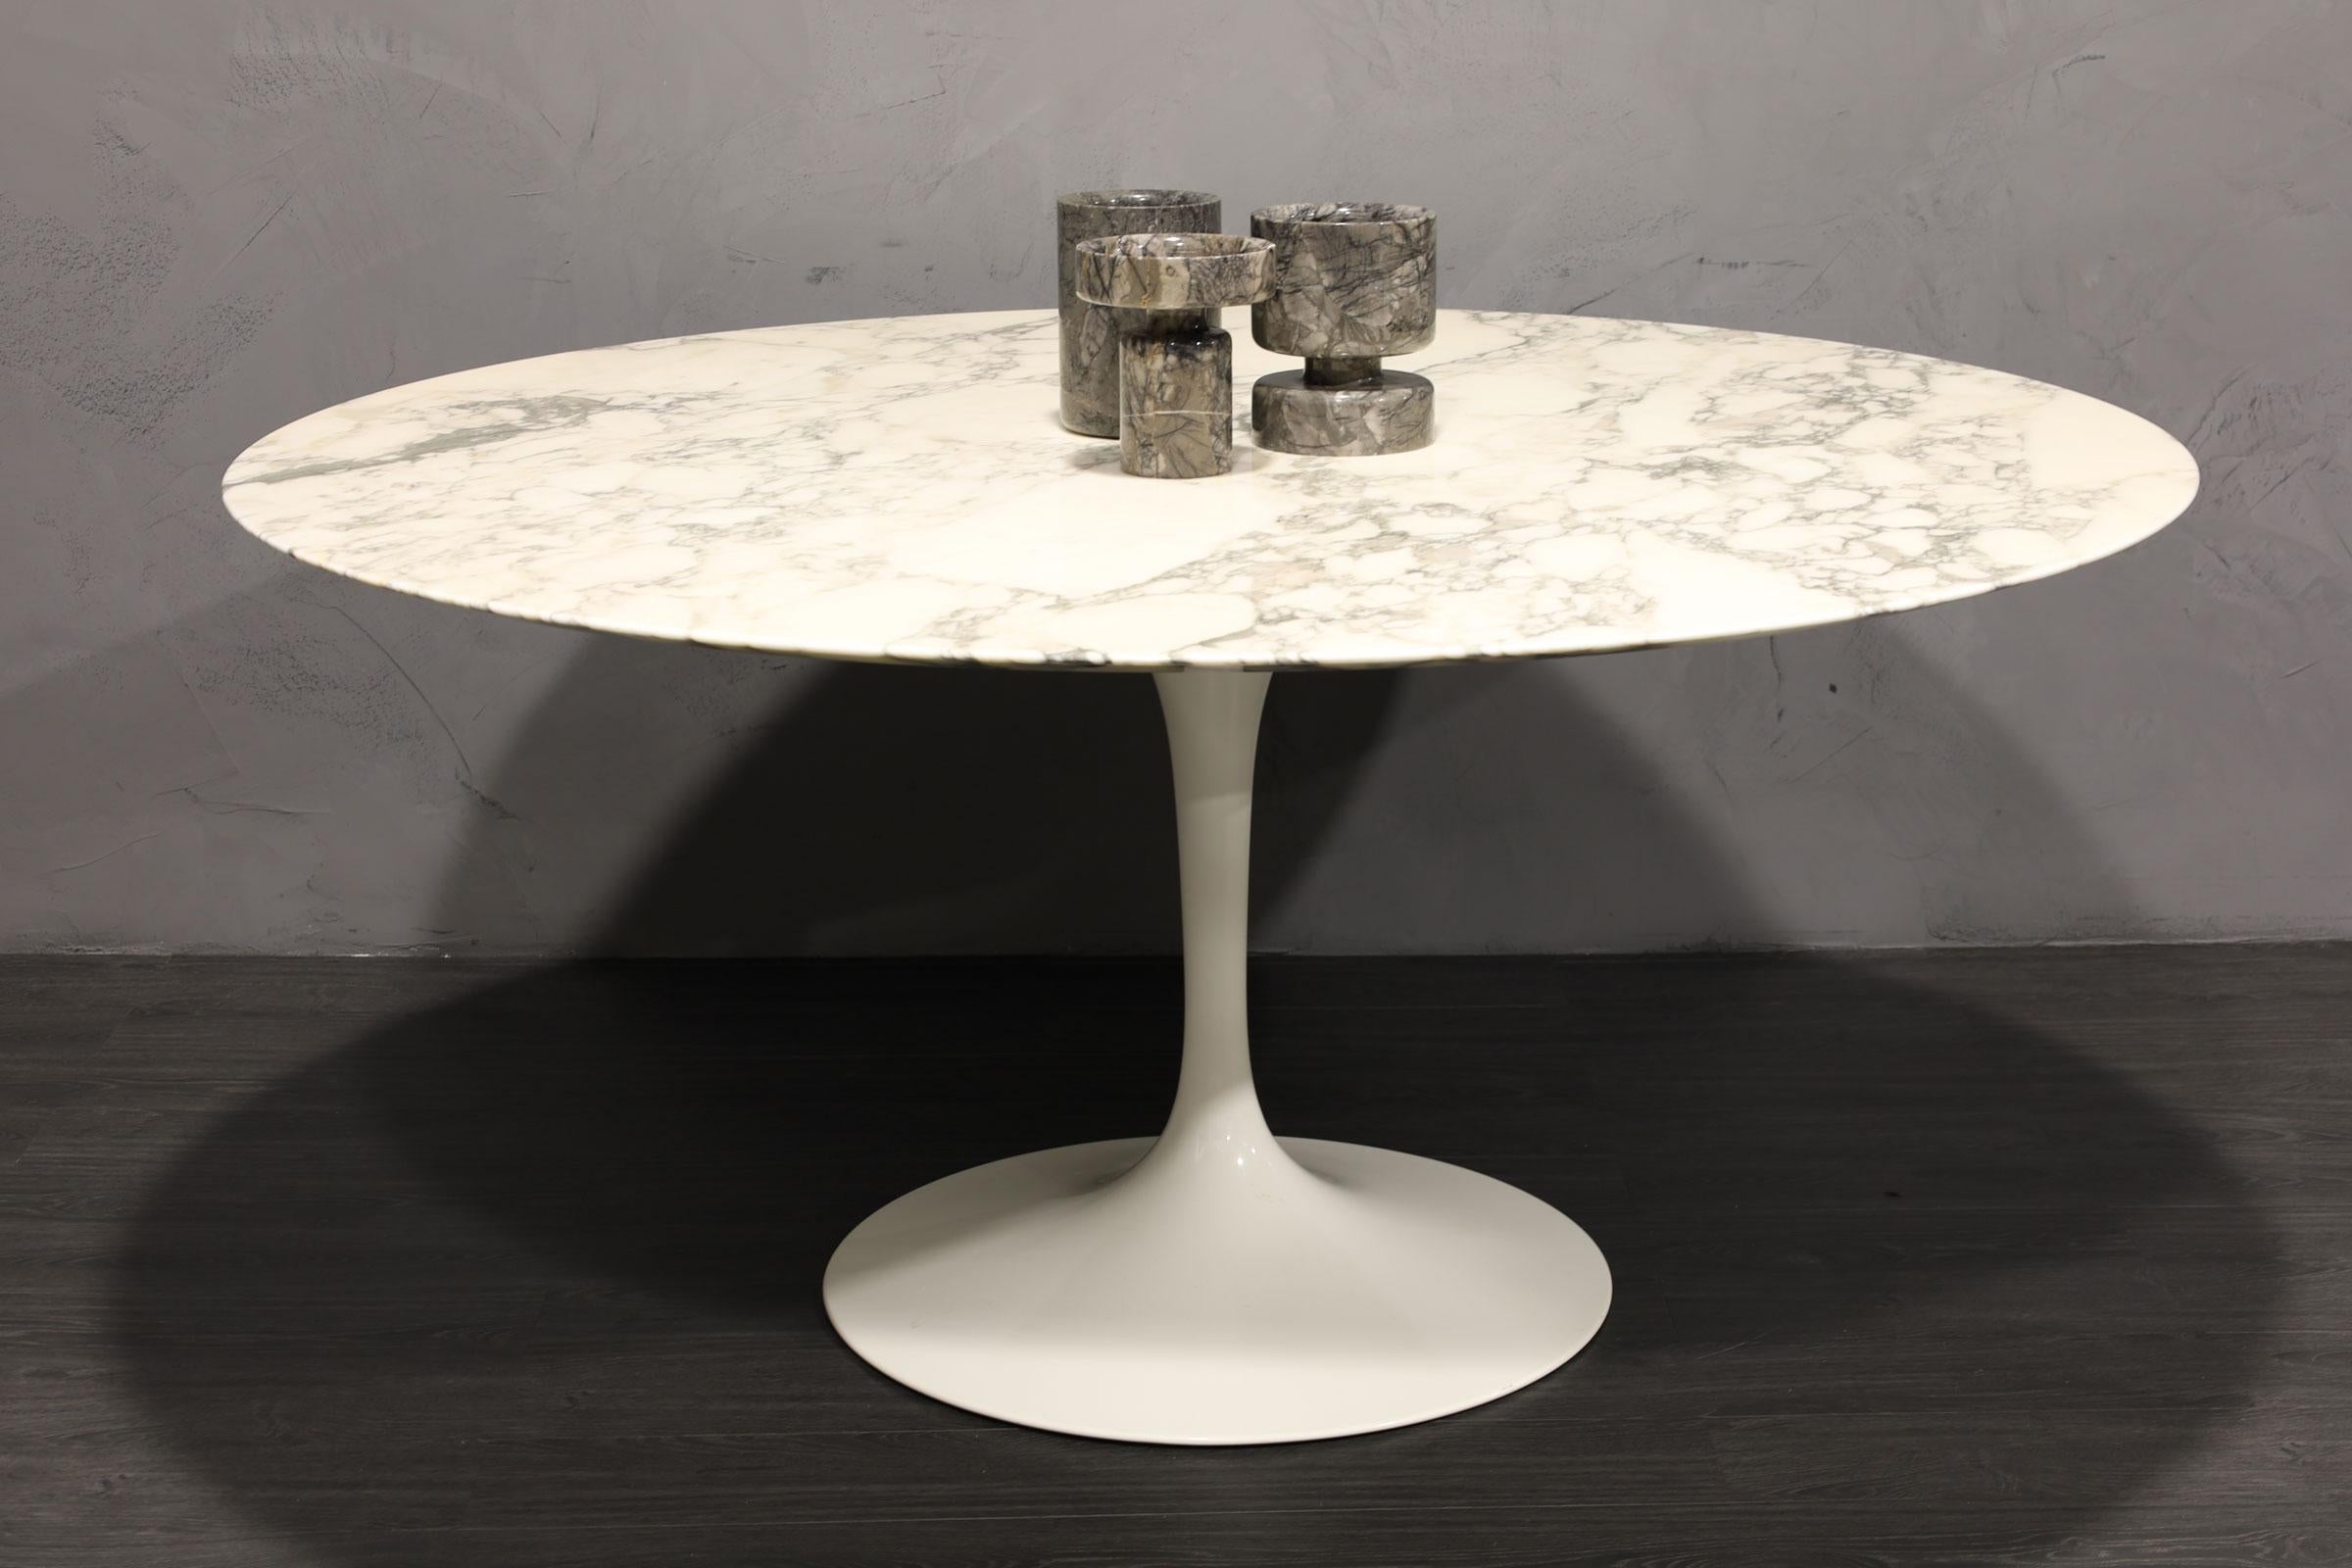 A very gently used Eero Saarinen for Knoll tulip table. In a beautiful Arabescato marble with a white base. This is ready for you immediately!.